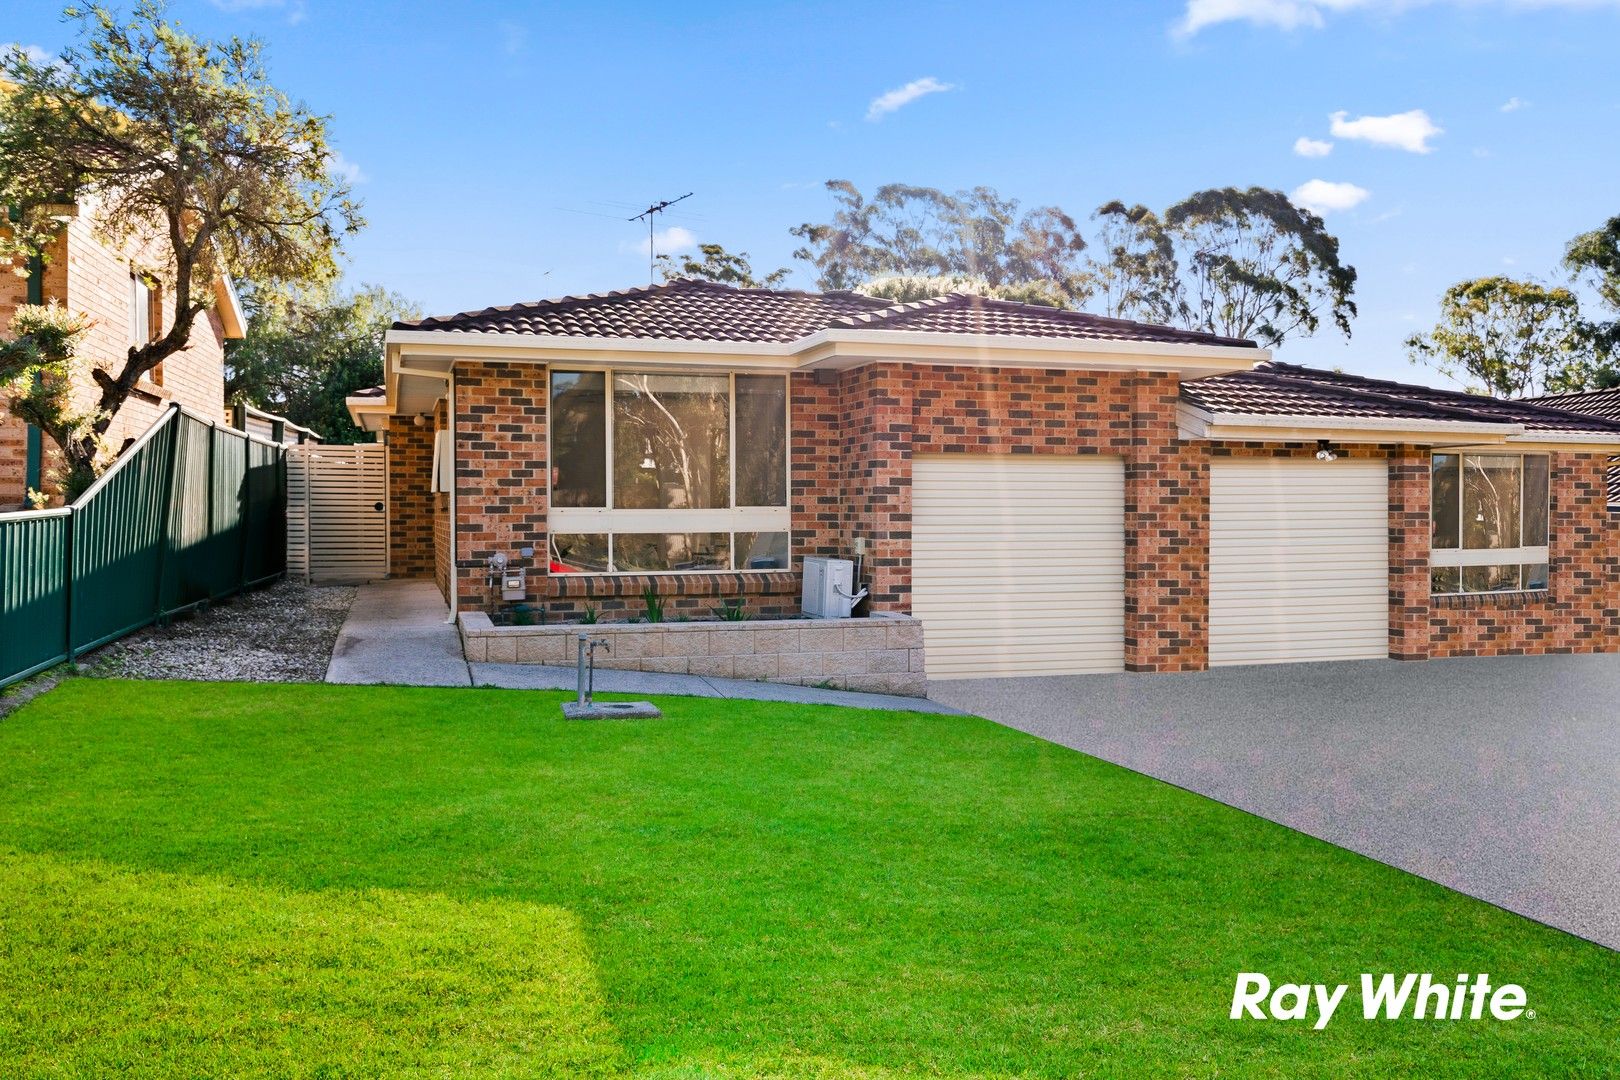 3 bedrooms House in 165 Pye Road QUAKERS HILL NSW, 2763